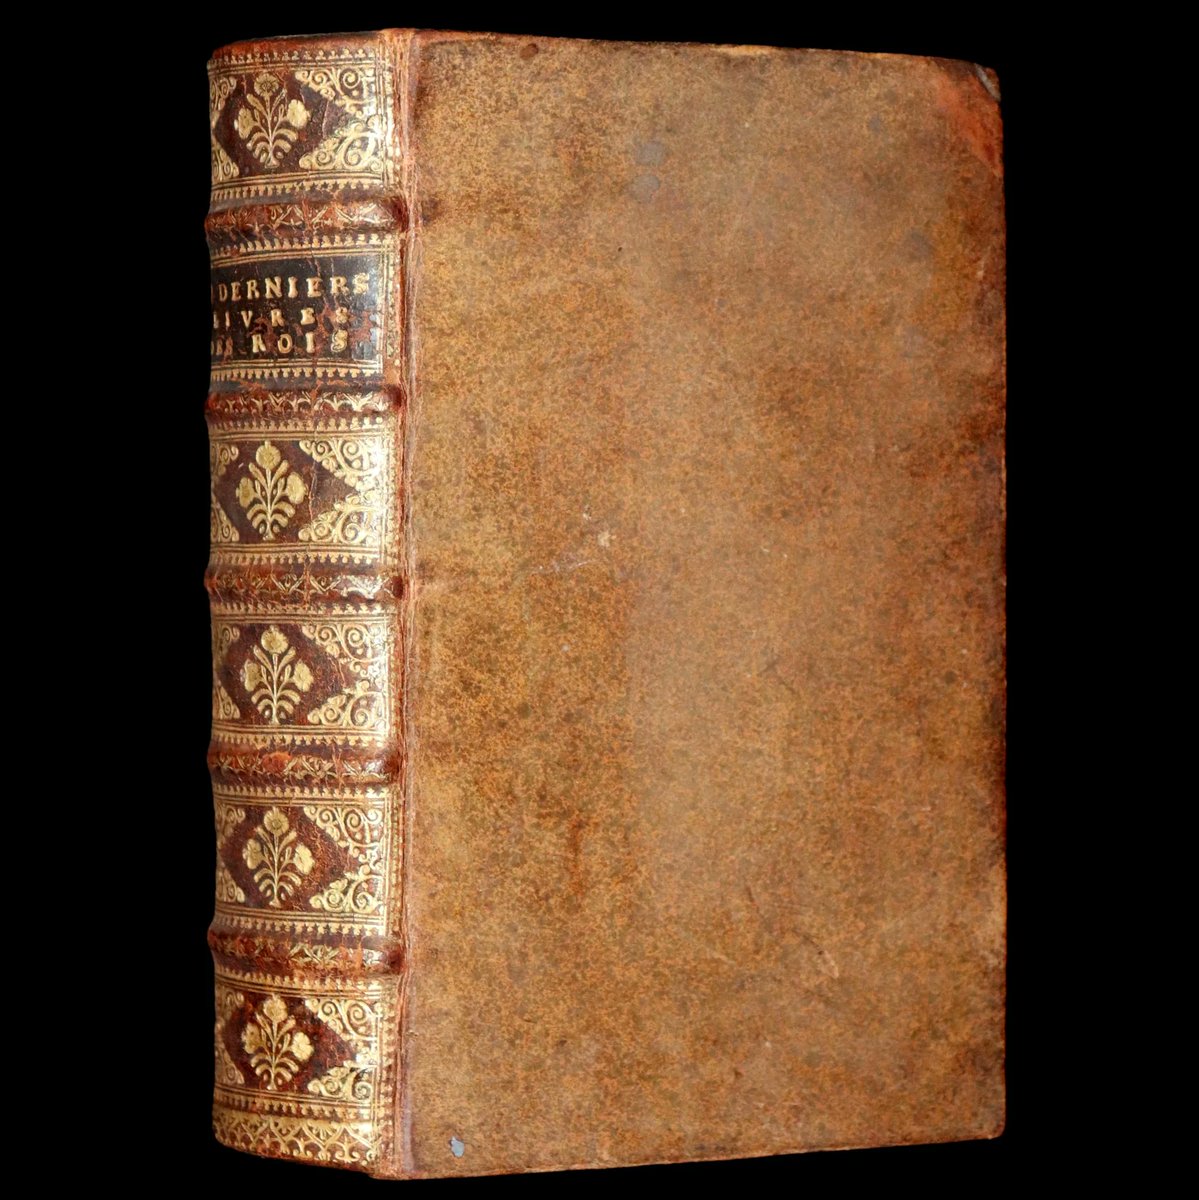 Discover the divine drama of kings and prophecies in this 1687 Latin-French Bible, featuring 'The Last Two Books of King.'mflibra.com/products/1687-… A timeless treasure that echoes the power and spirituality of biblical tales. #BookWithASoul #MFLIBRA #OwnAPieceOfHistory #RareBooks